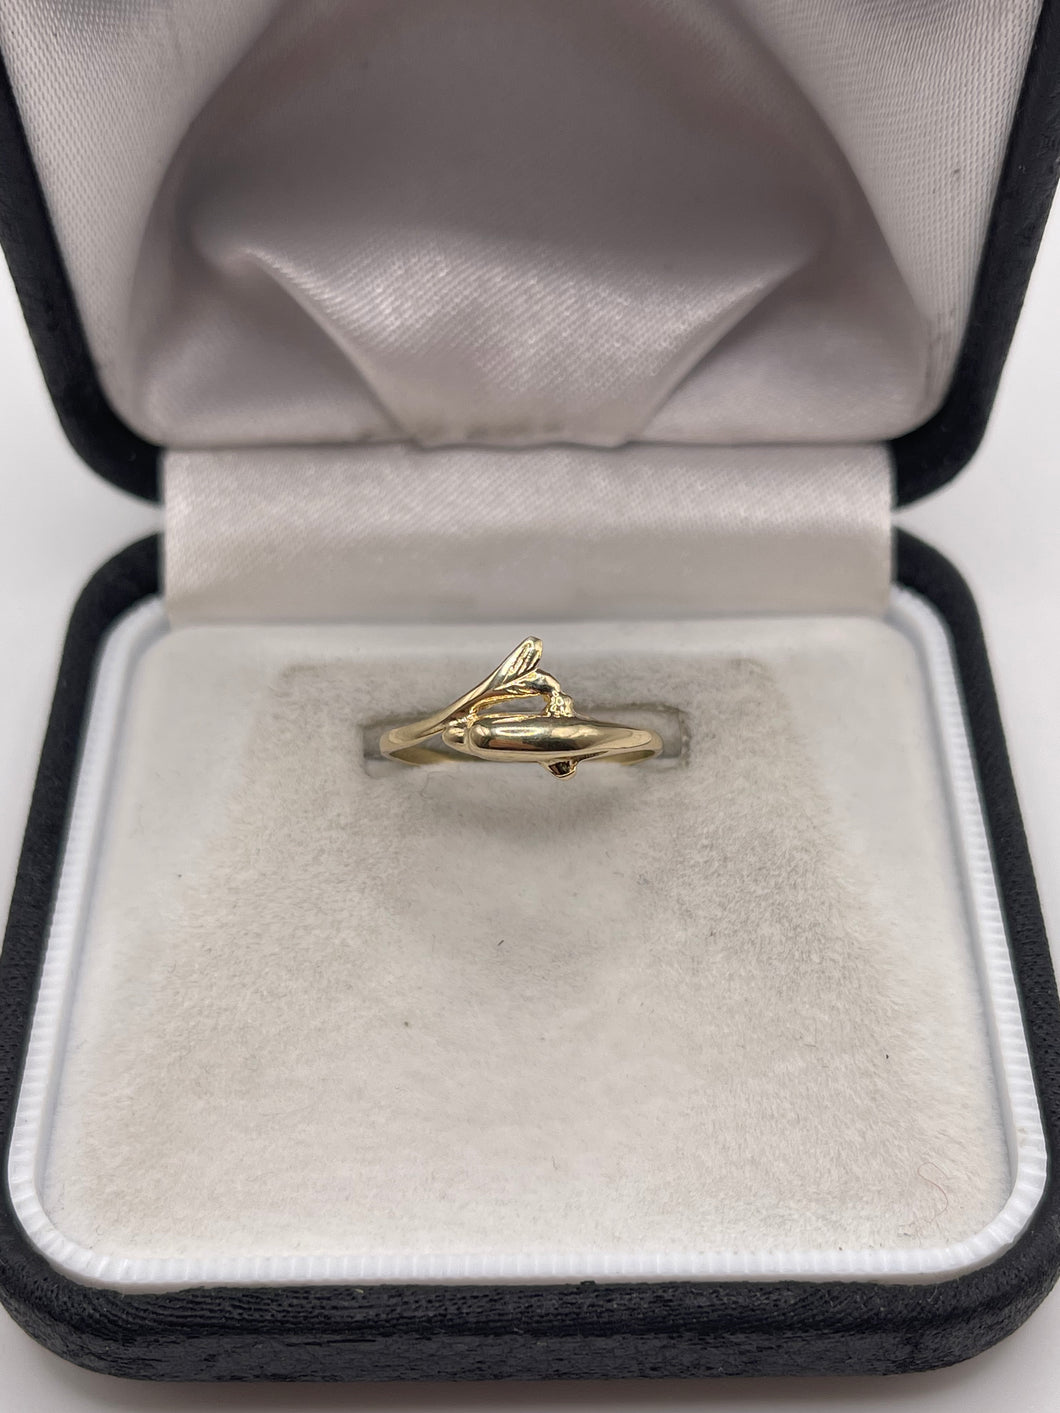 9ct gold dolphin ring